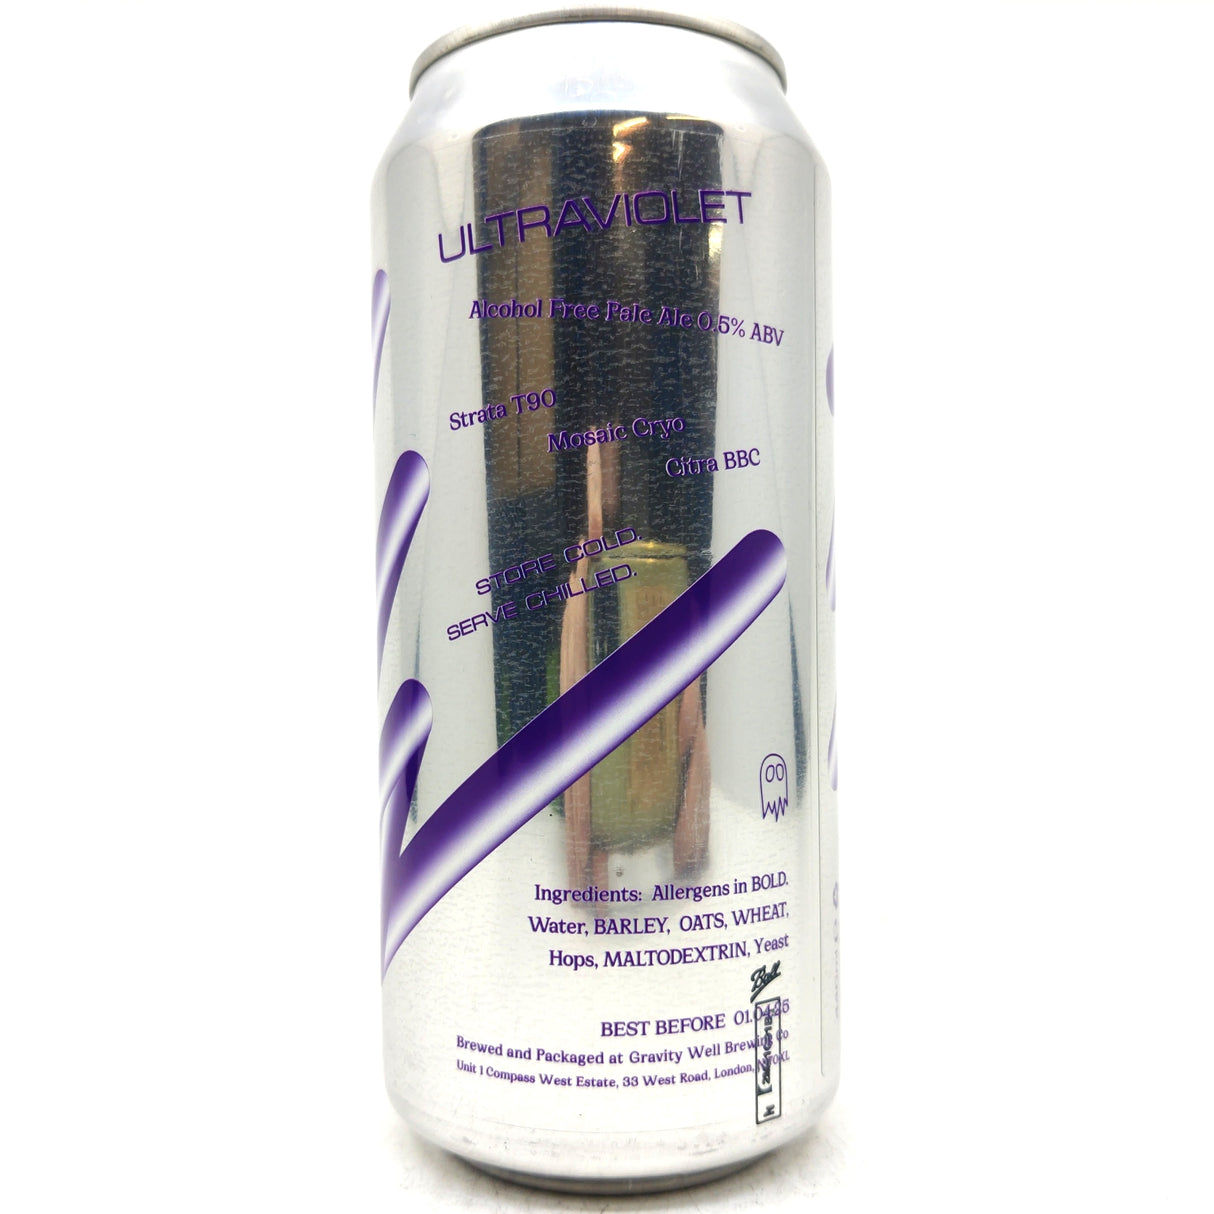 We Can Be Friends Ultra Violet IPA 0.5% (440ml can)-Hop Burns & Black